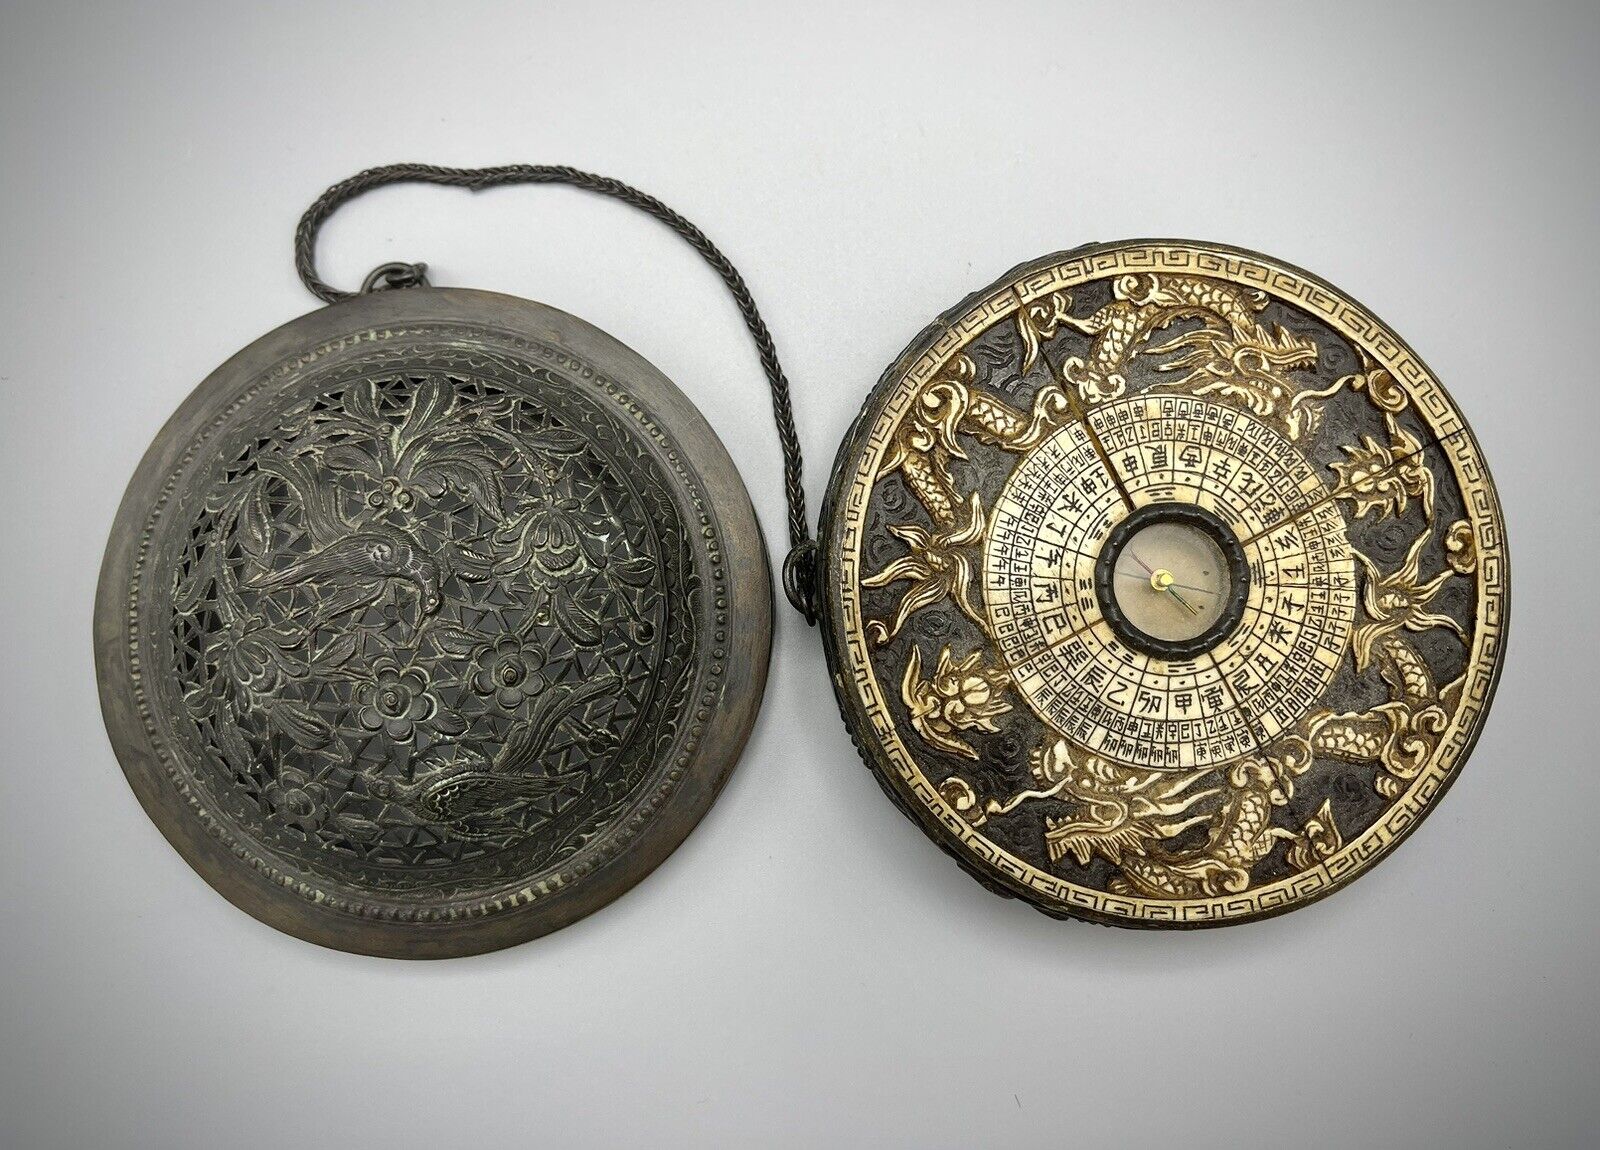 A RARE ANTIQUE CHINESE GEOMANCER’S FENG SHUI COMPASS WITH COVER